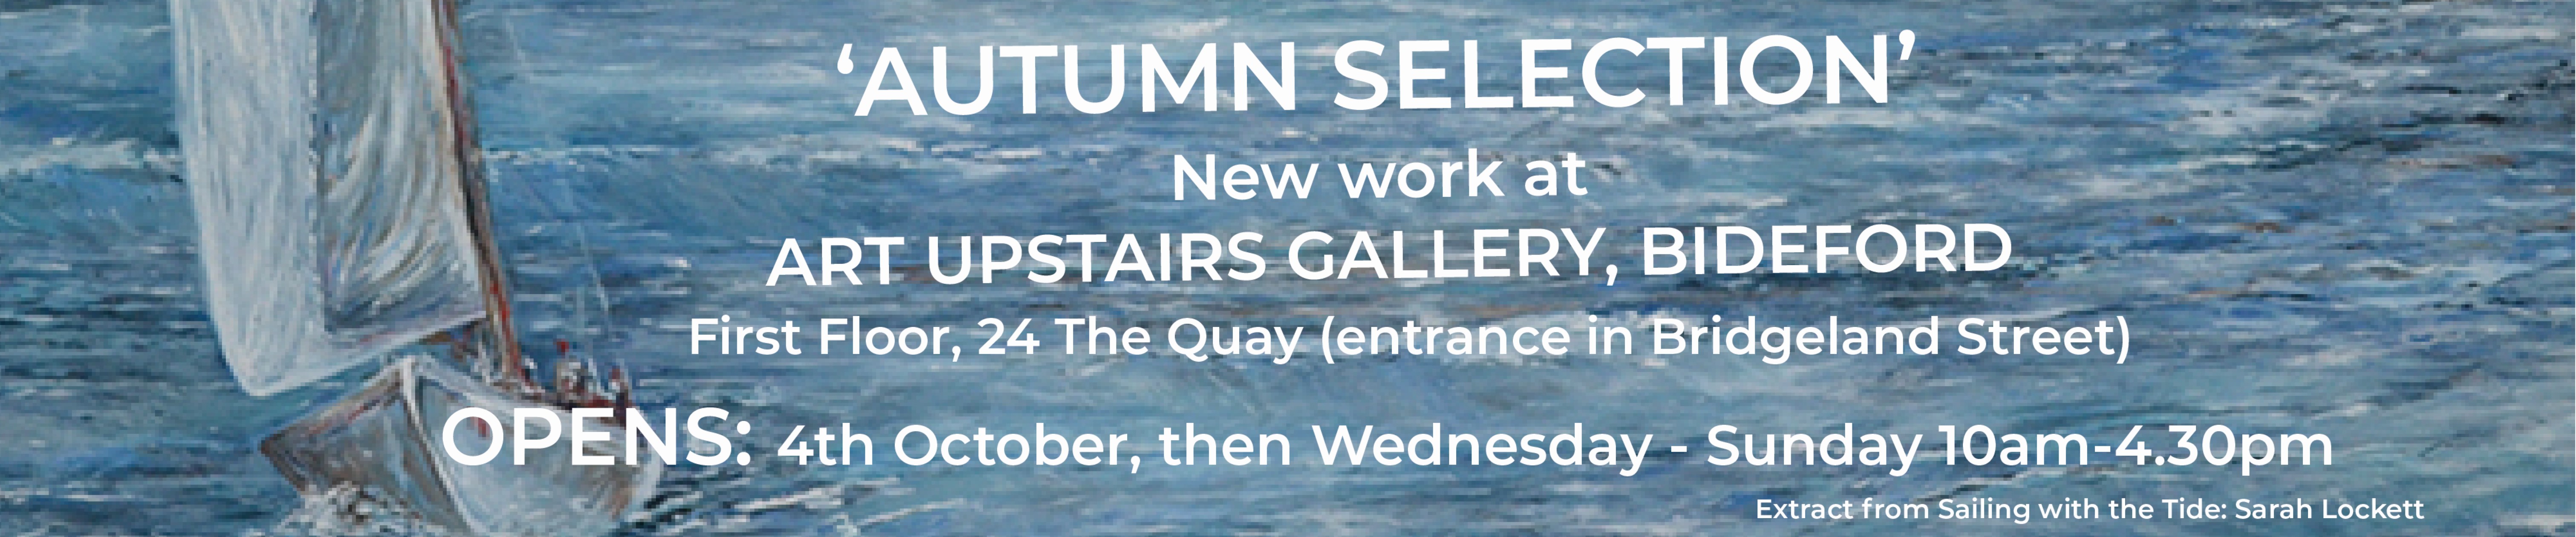 'Autumn Selection' New work at Art Upstairs Gallery, Bideford. First Floor, 24 The Quay (entrance in Bridgeland Street). Opens: 4th October then Wednesday to Sunday 10am to 4:30pm